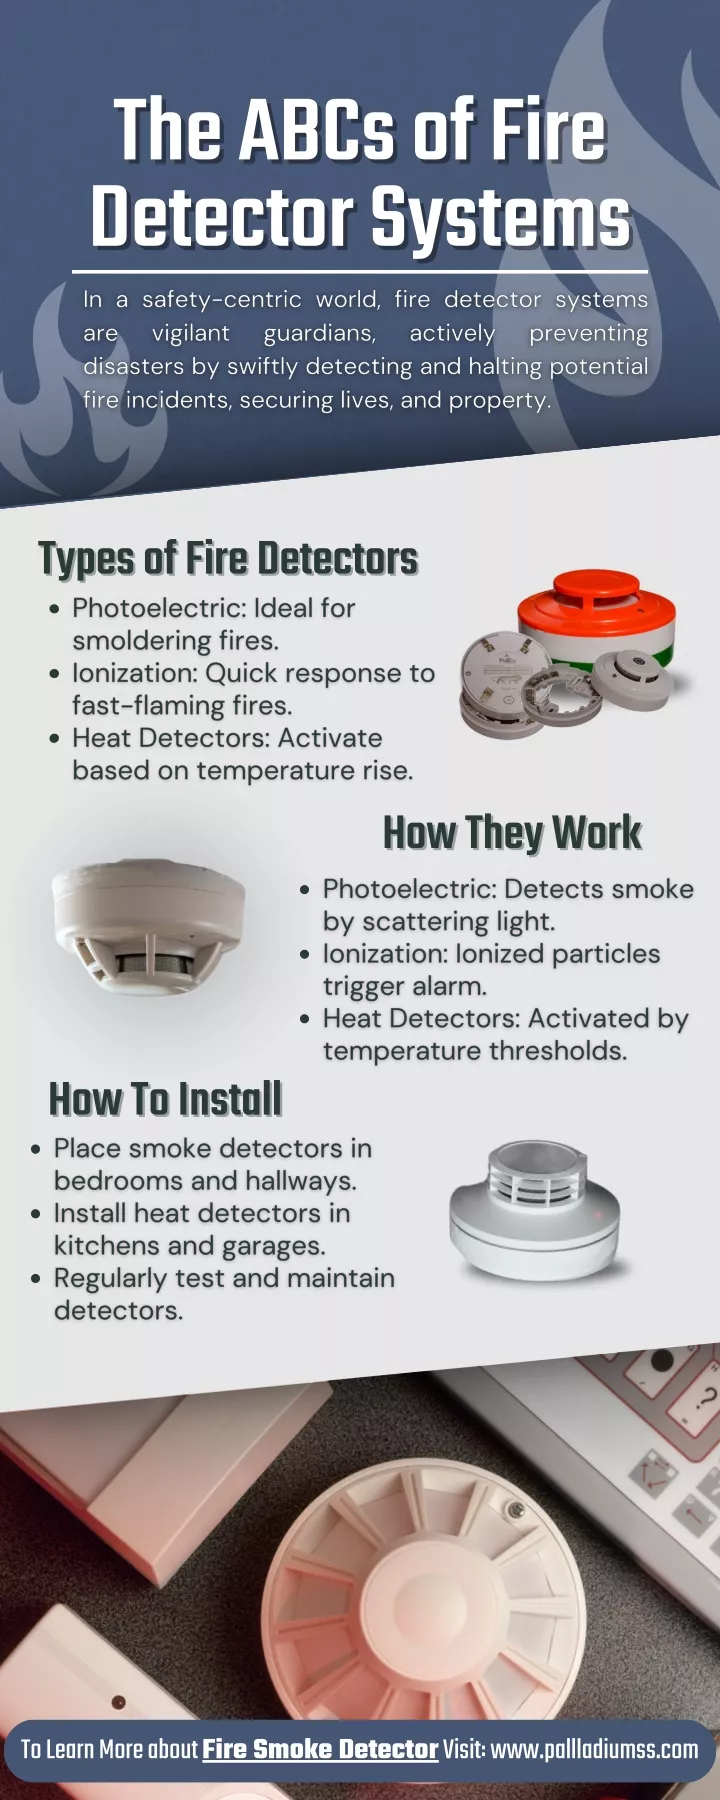 the abcs of fire the abcs of fire detector